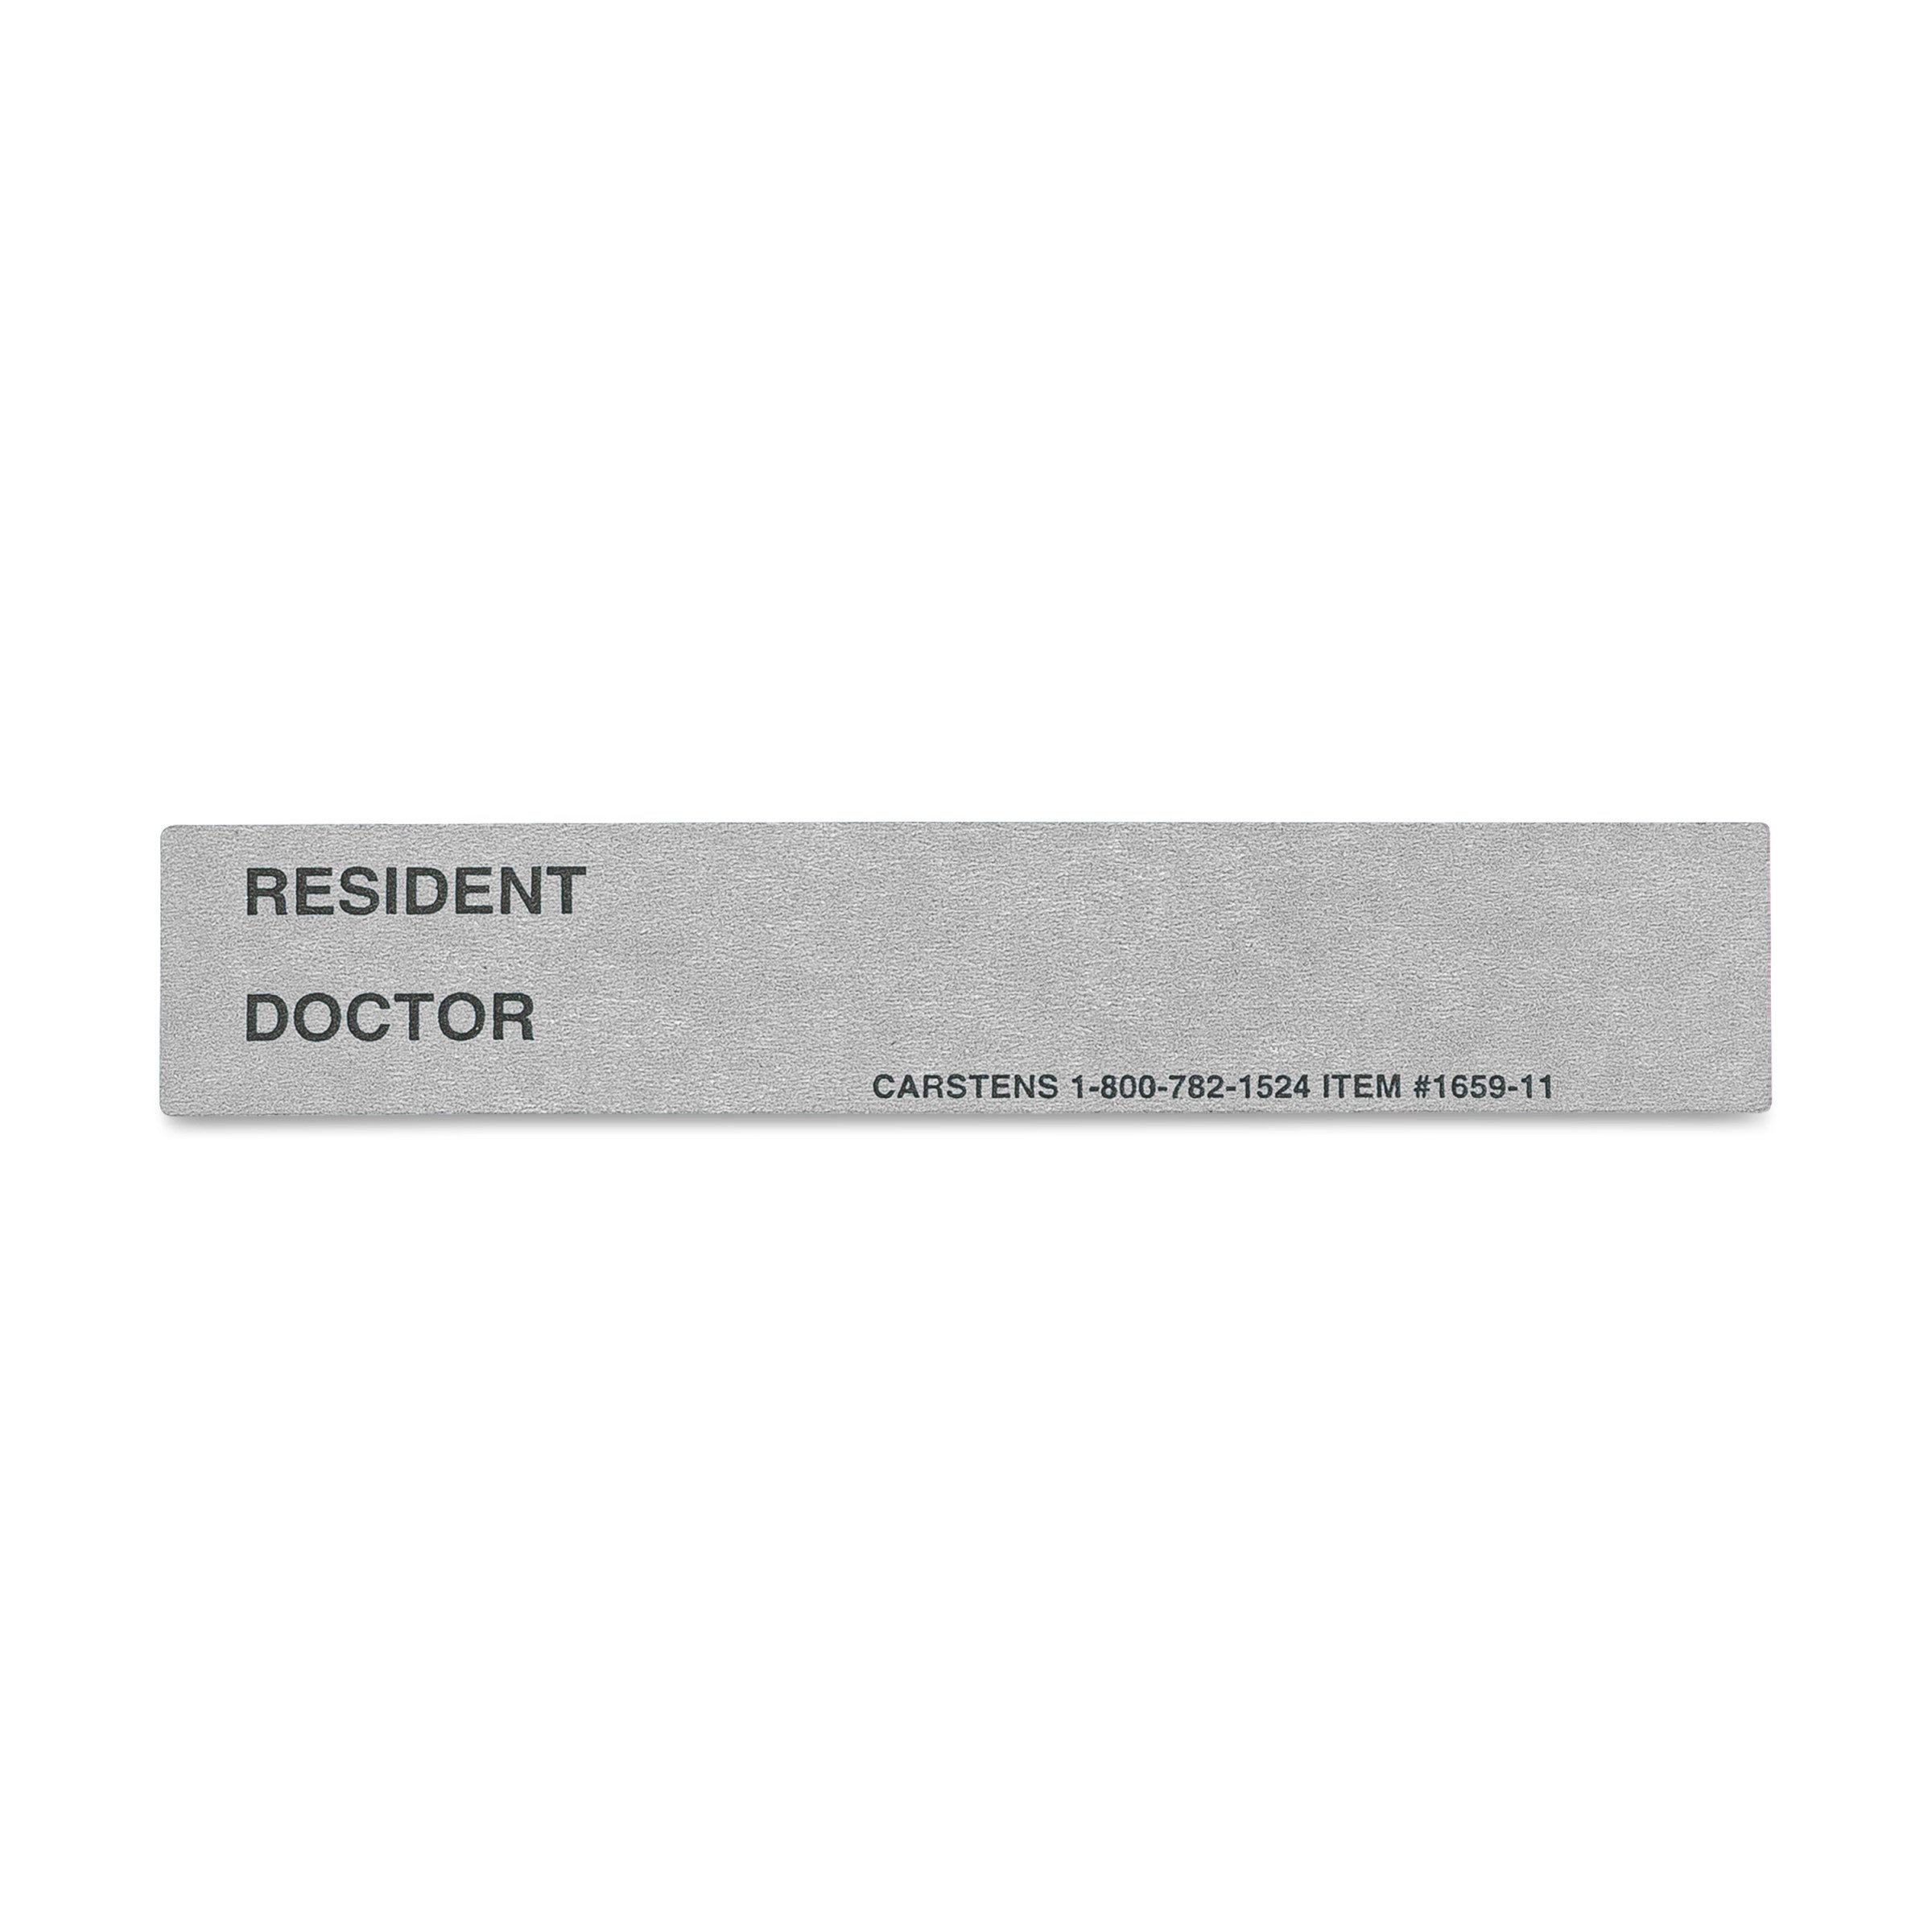 Resident / Doctor Preprinted ID Cards for 1.5 – 4” Ring Binder Spines - Pack of 100